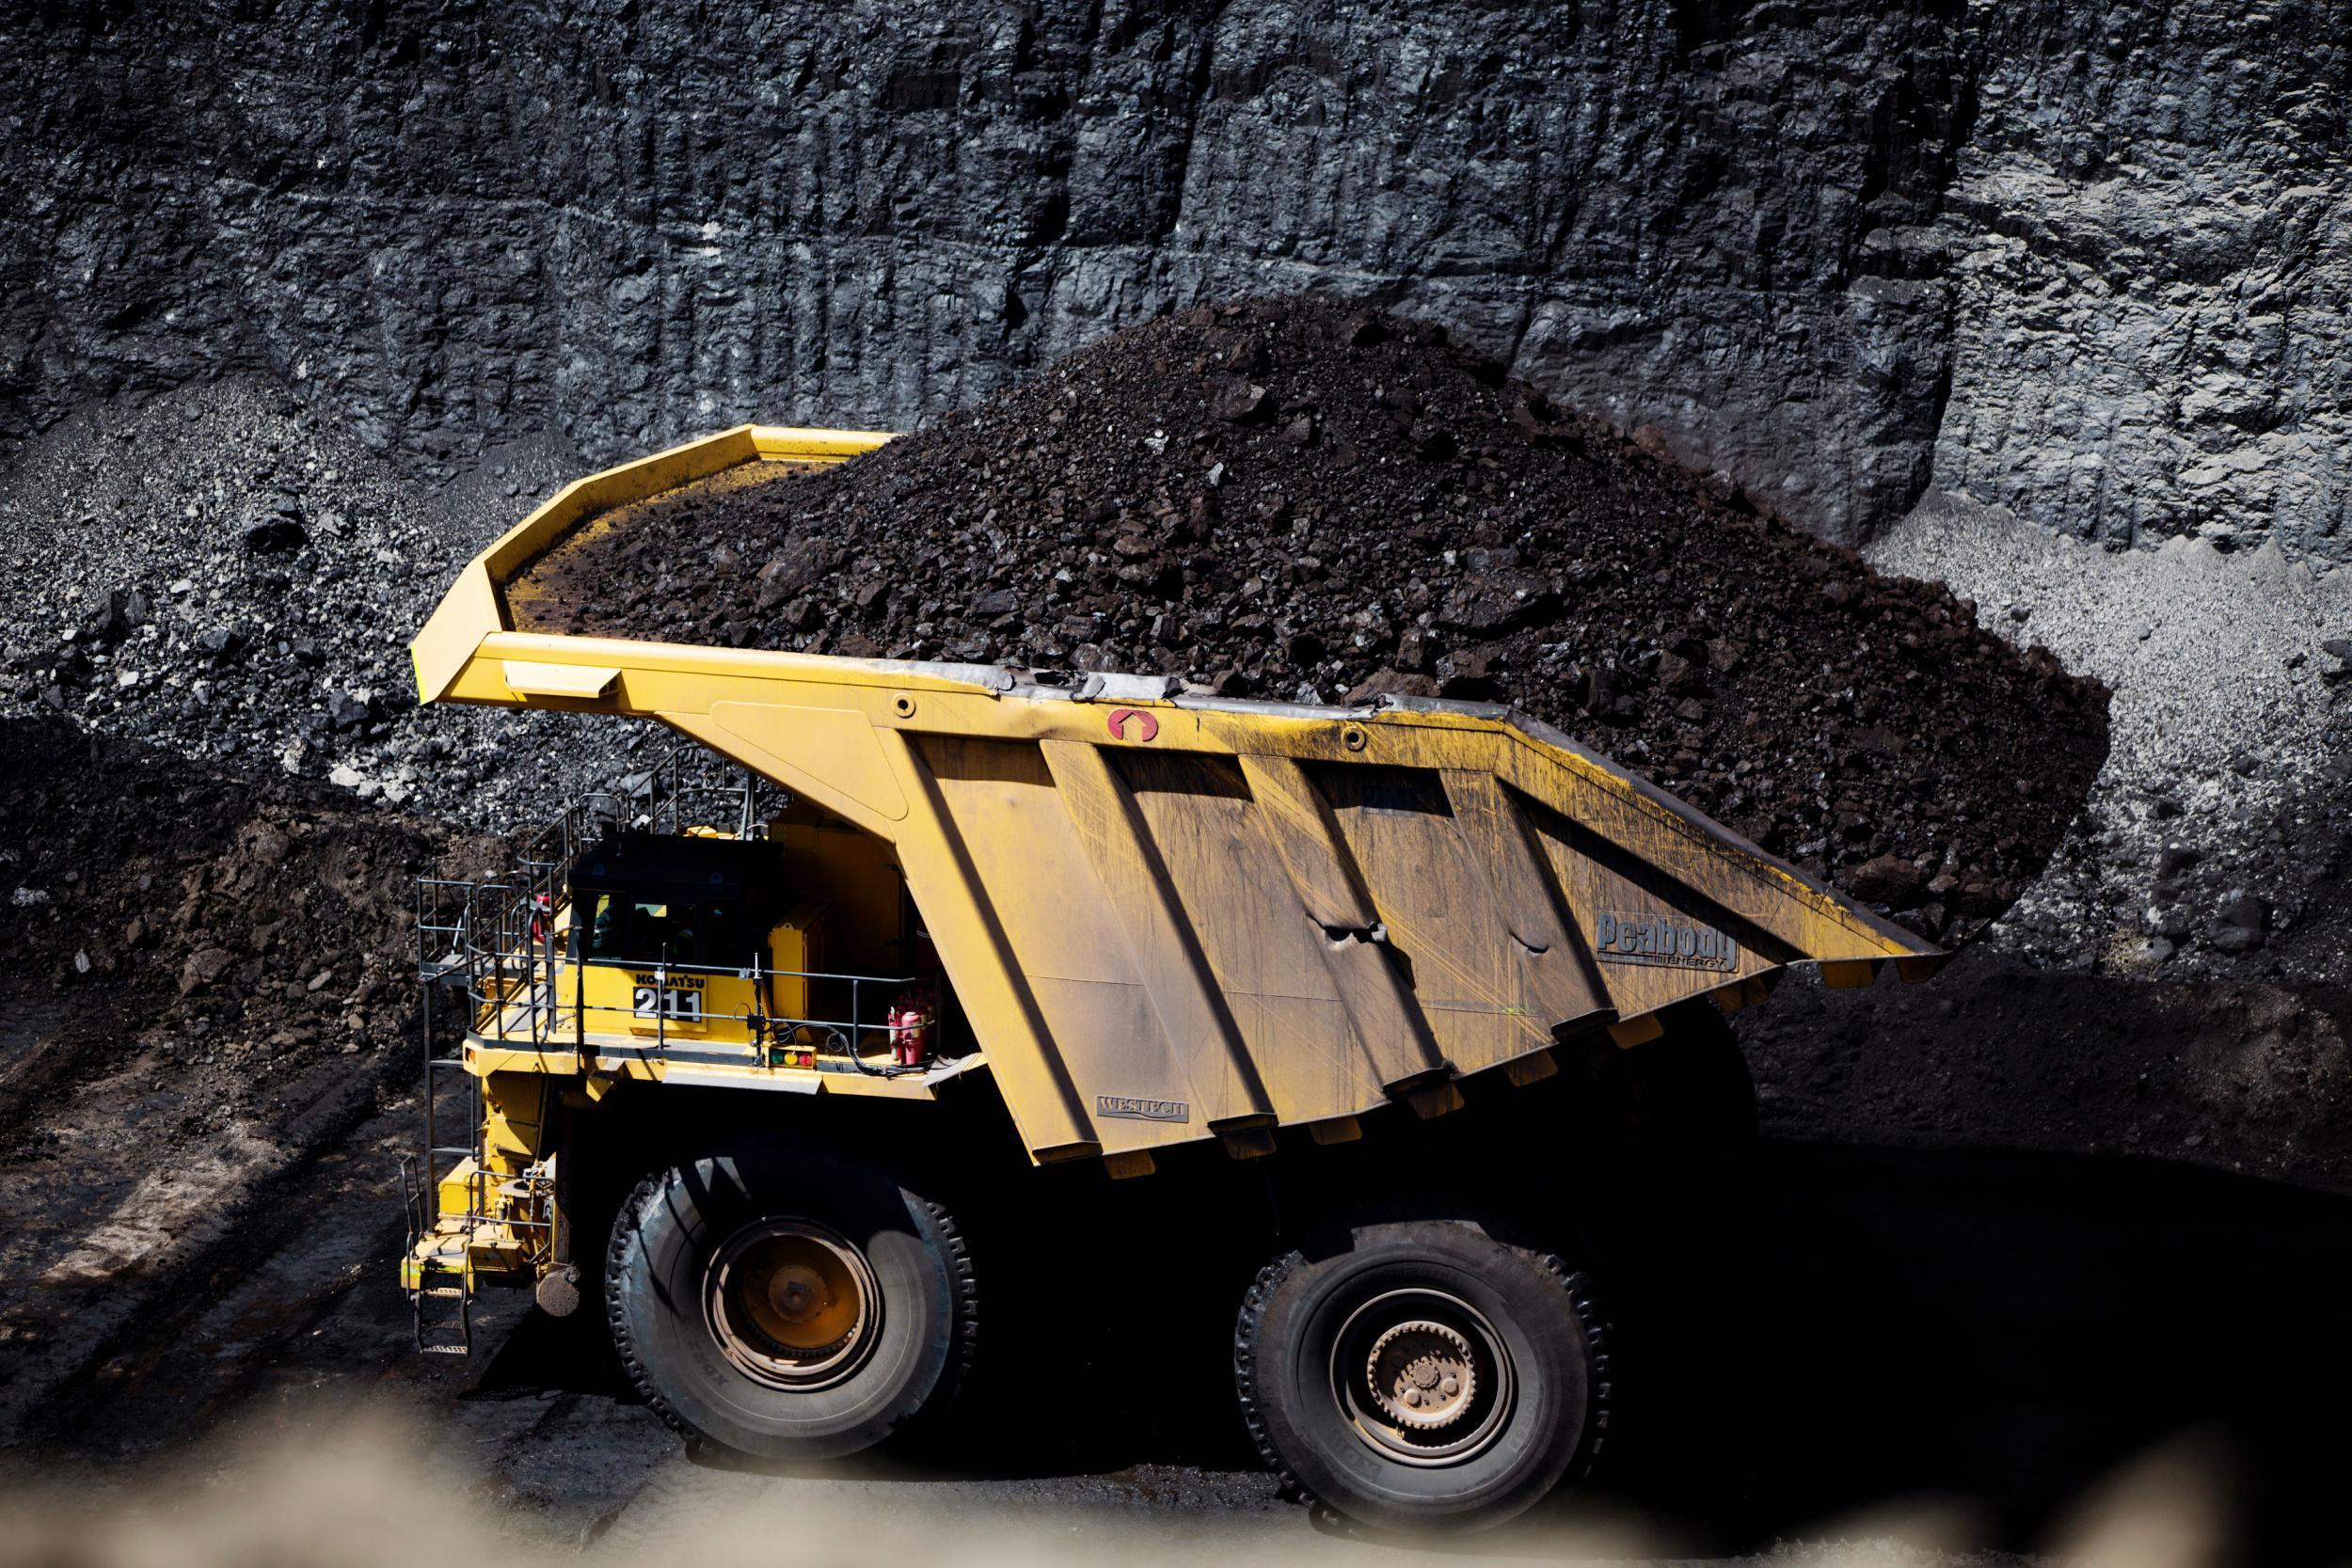 A truck hauls a vast pile of coal at a mine near Gillette, Wyoming